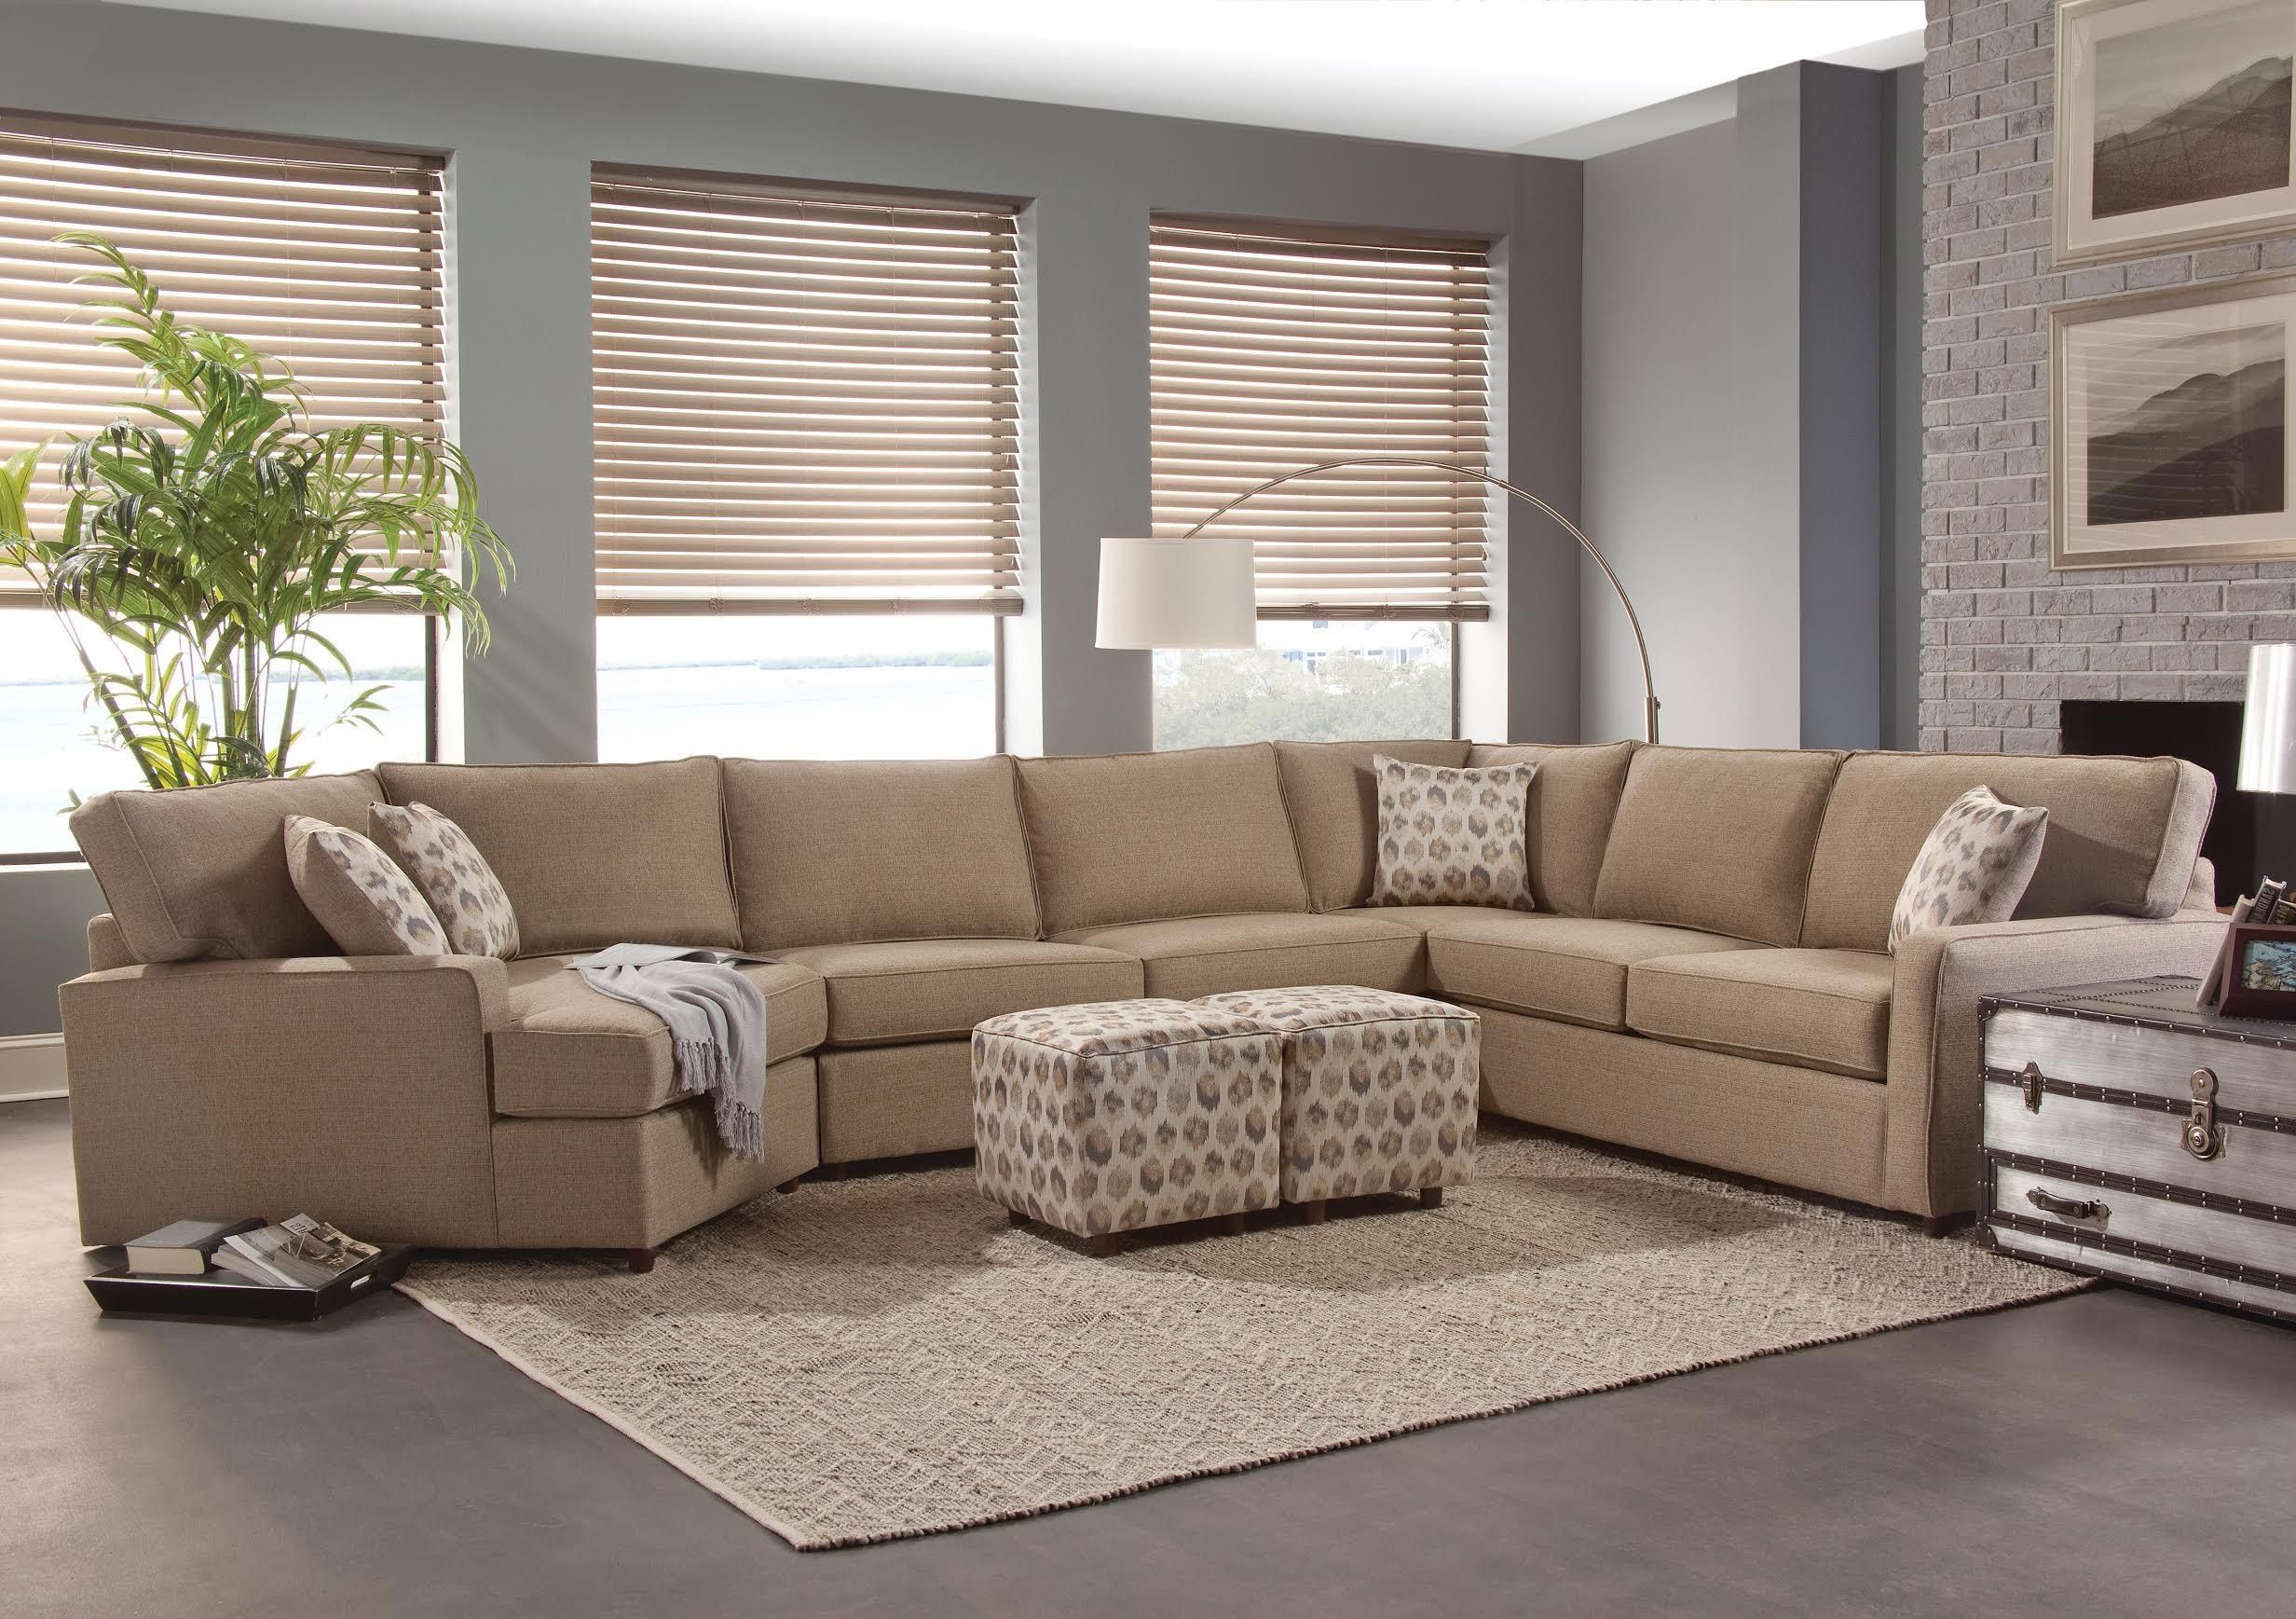 Belfort Pertaining To Favorite Virginia Sectional Sofas (View 1 of 15)